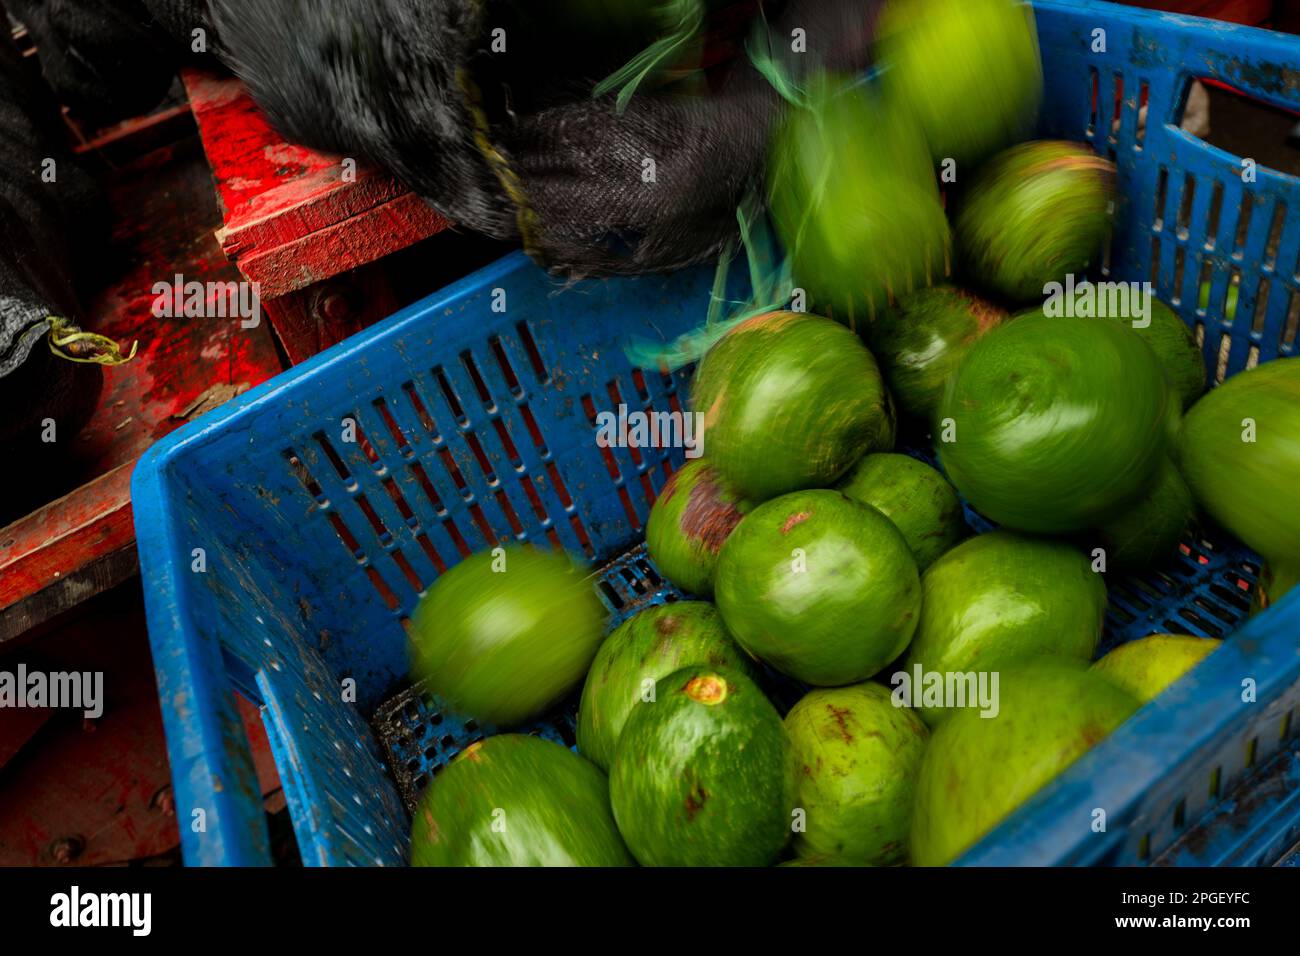 Fresh avocados are seen transferred from a mesh bag into a plastic crate in the street market in Cali, Colombia. Stock Photo